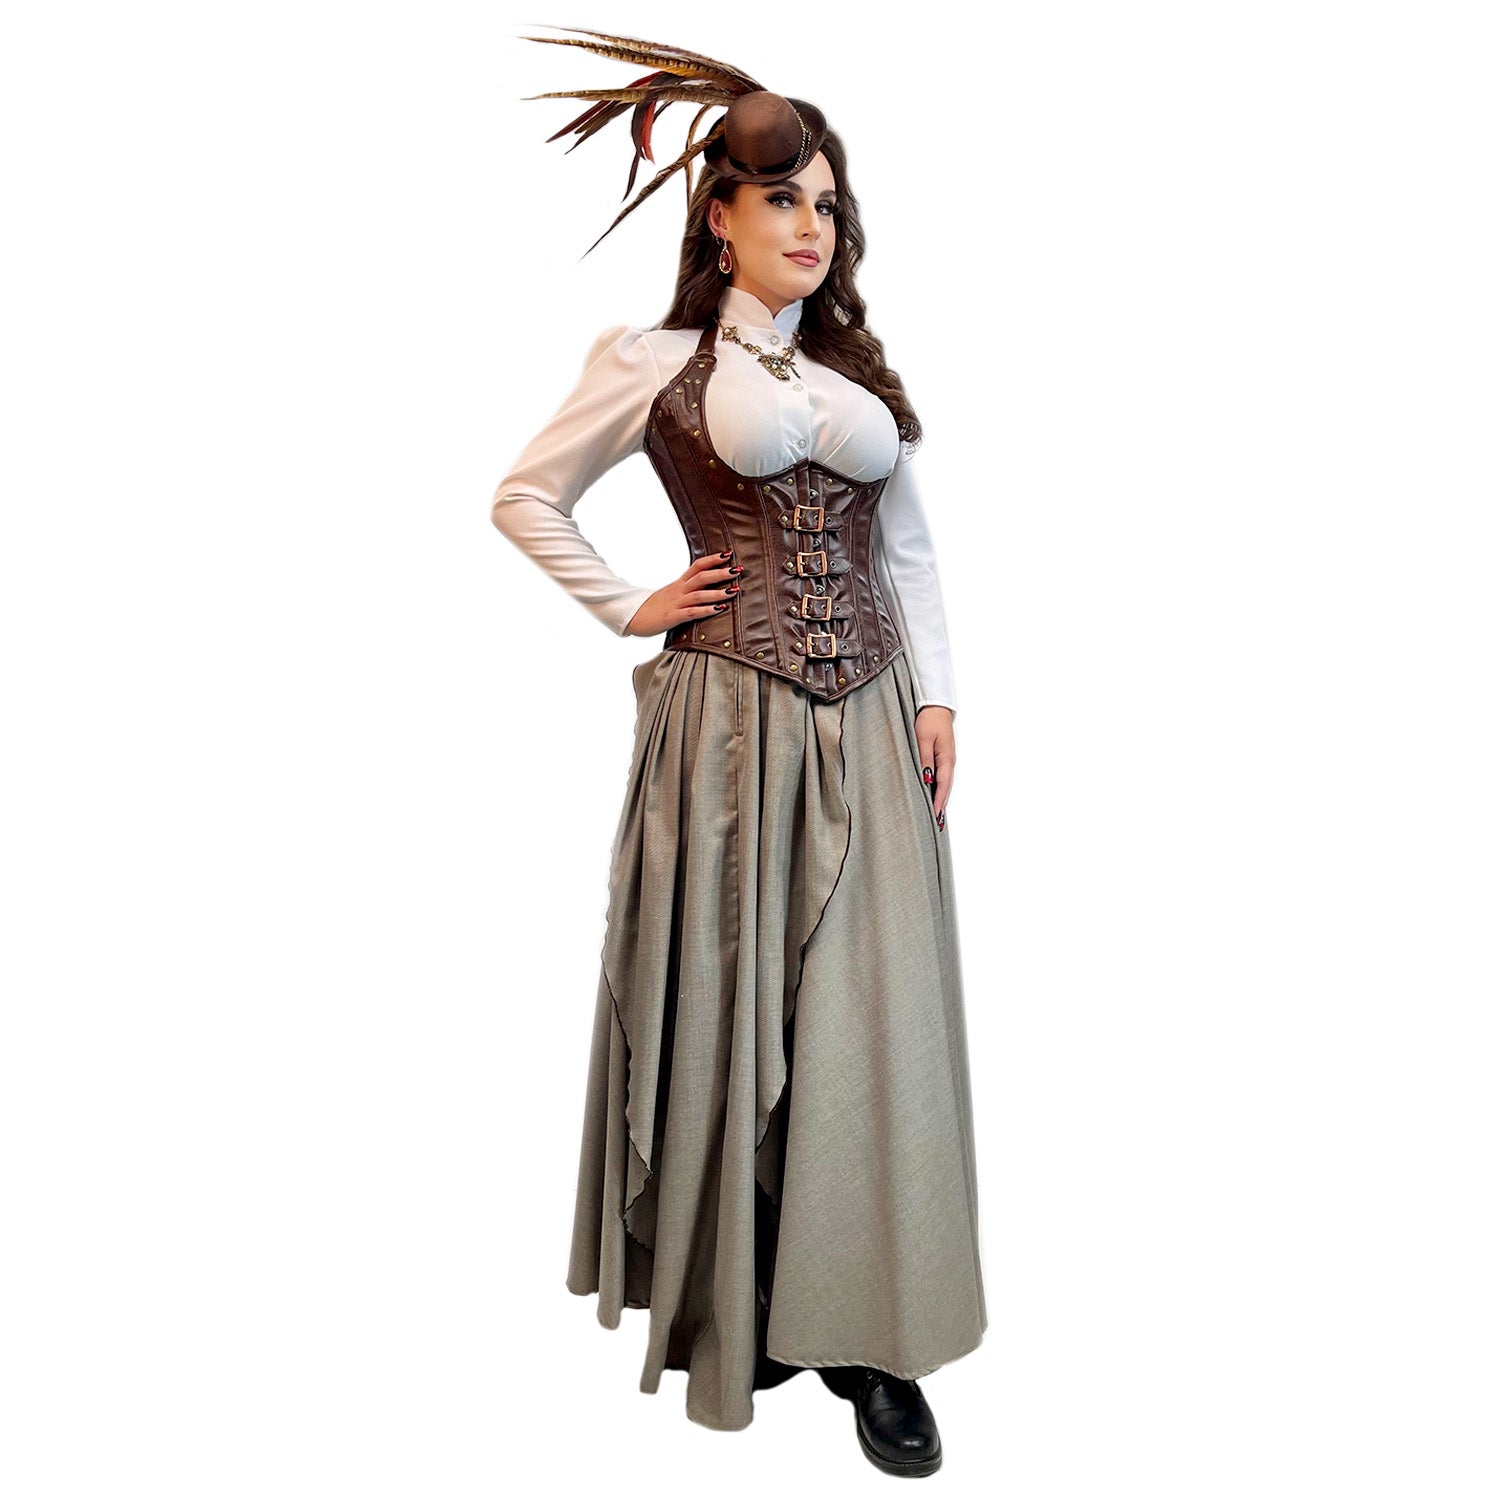 Women's Steampunk Retro Brown Adult Costume w/ Feathered Fascinator Hat